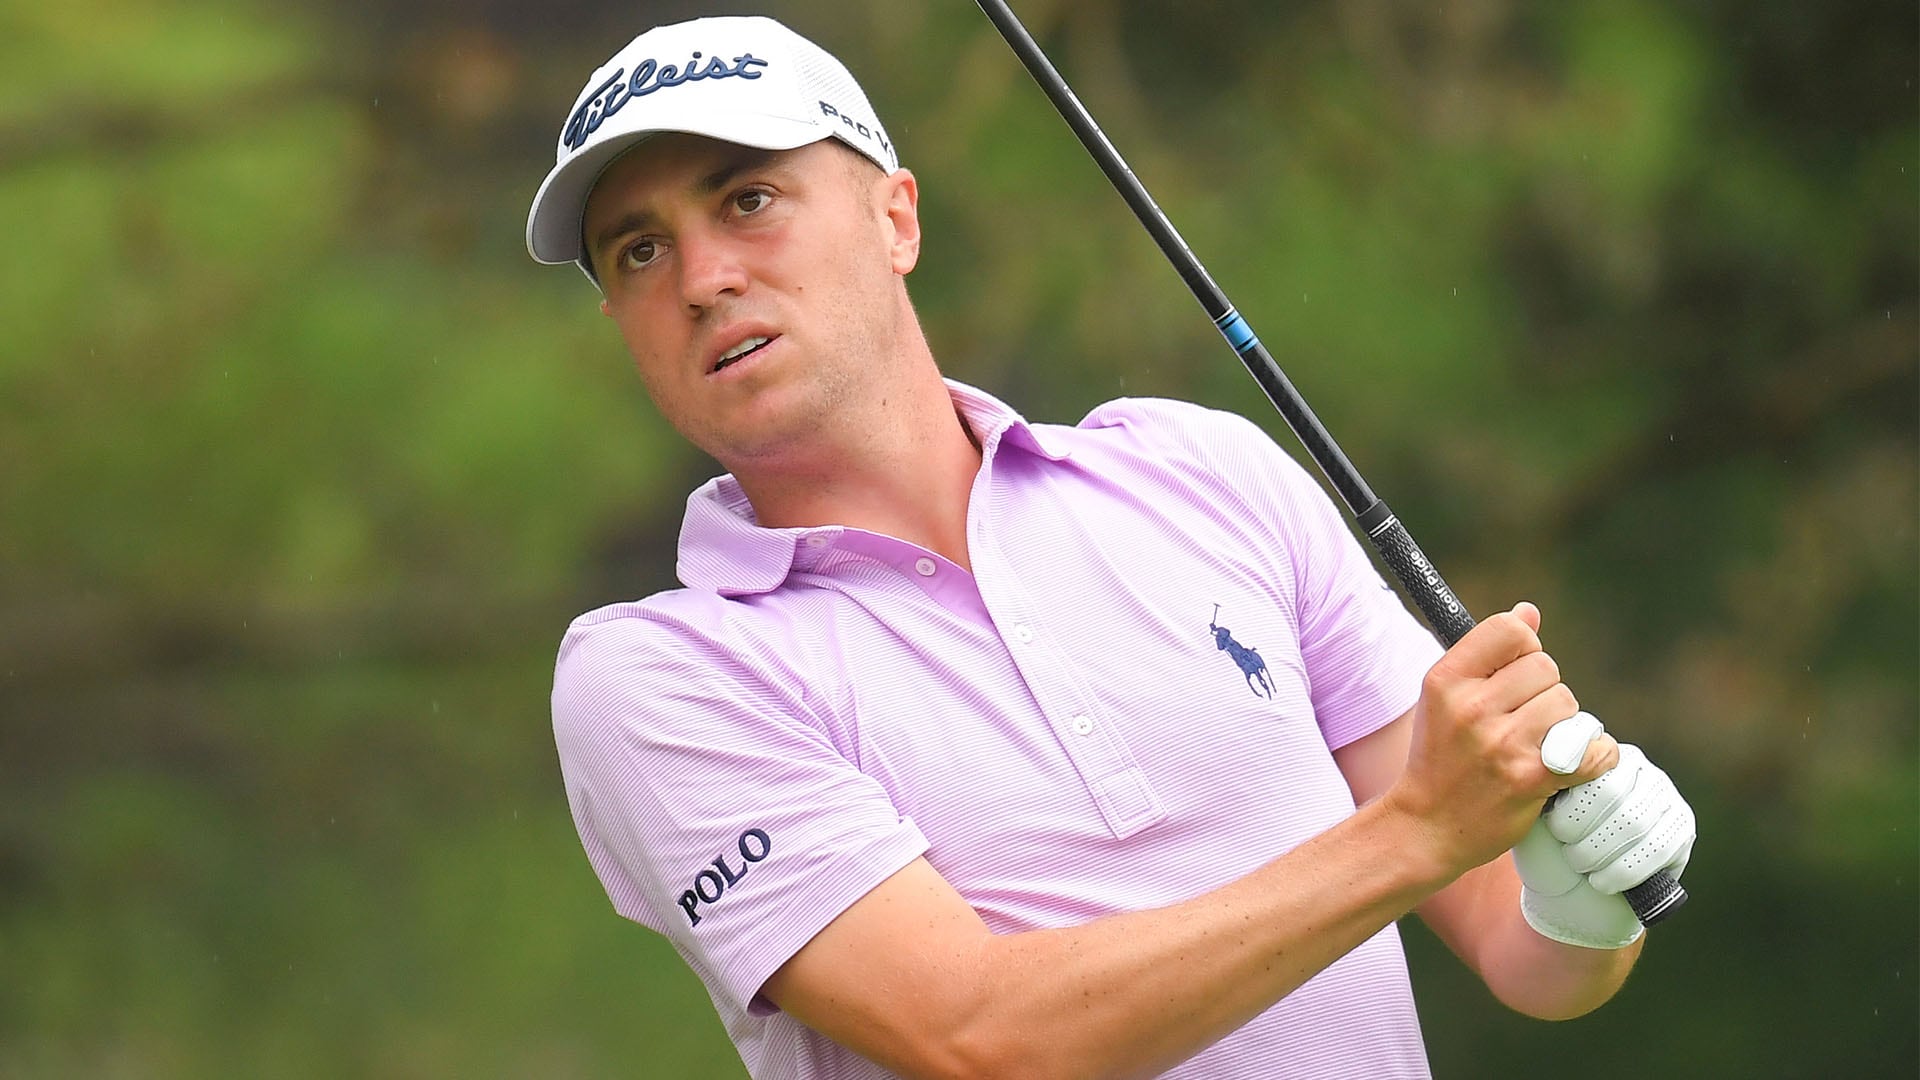 Justin Thomas appreciates golf’s safety as COVID-19 affects sports world